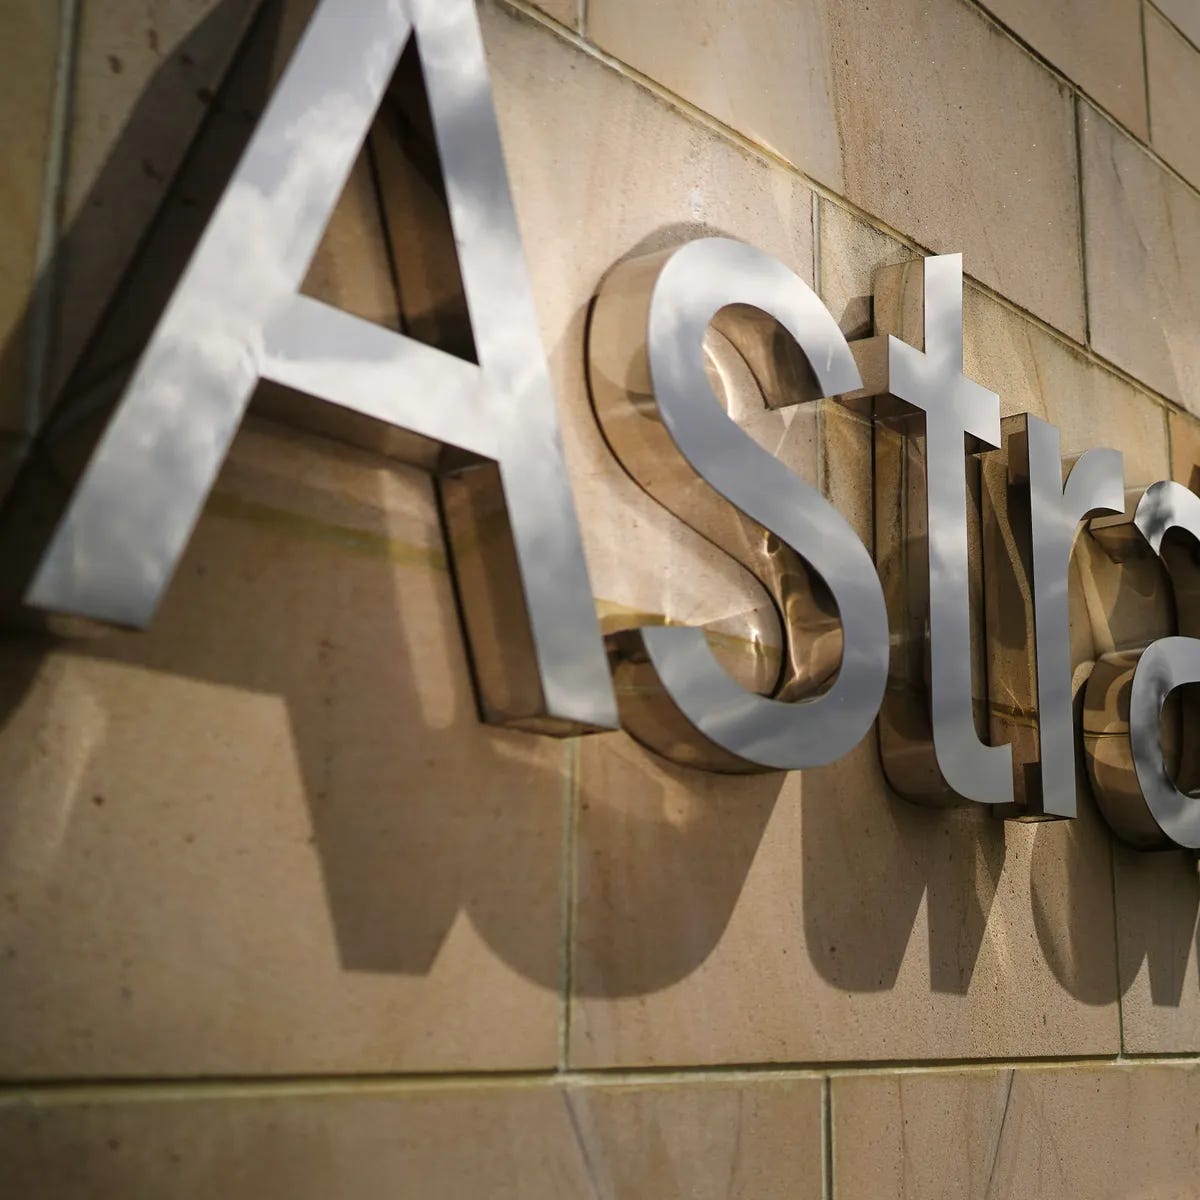 AstraZeneca’s earnings surprise investors as cancer drugs fuel growth